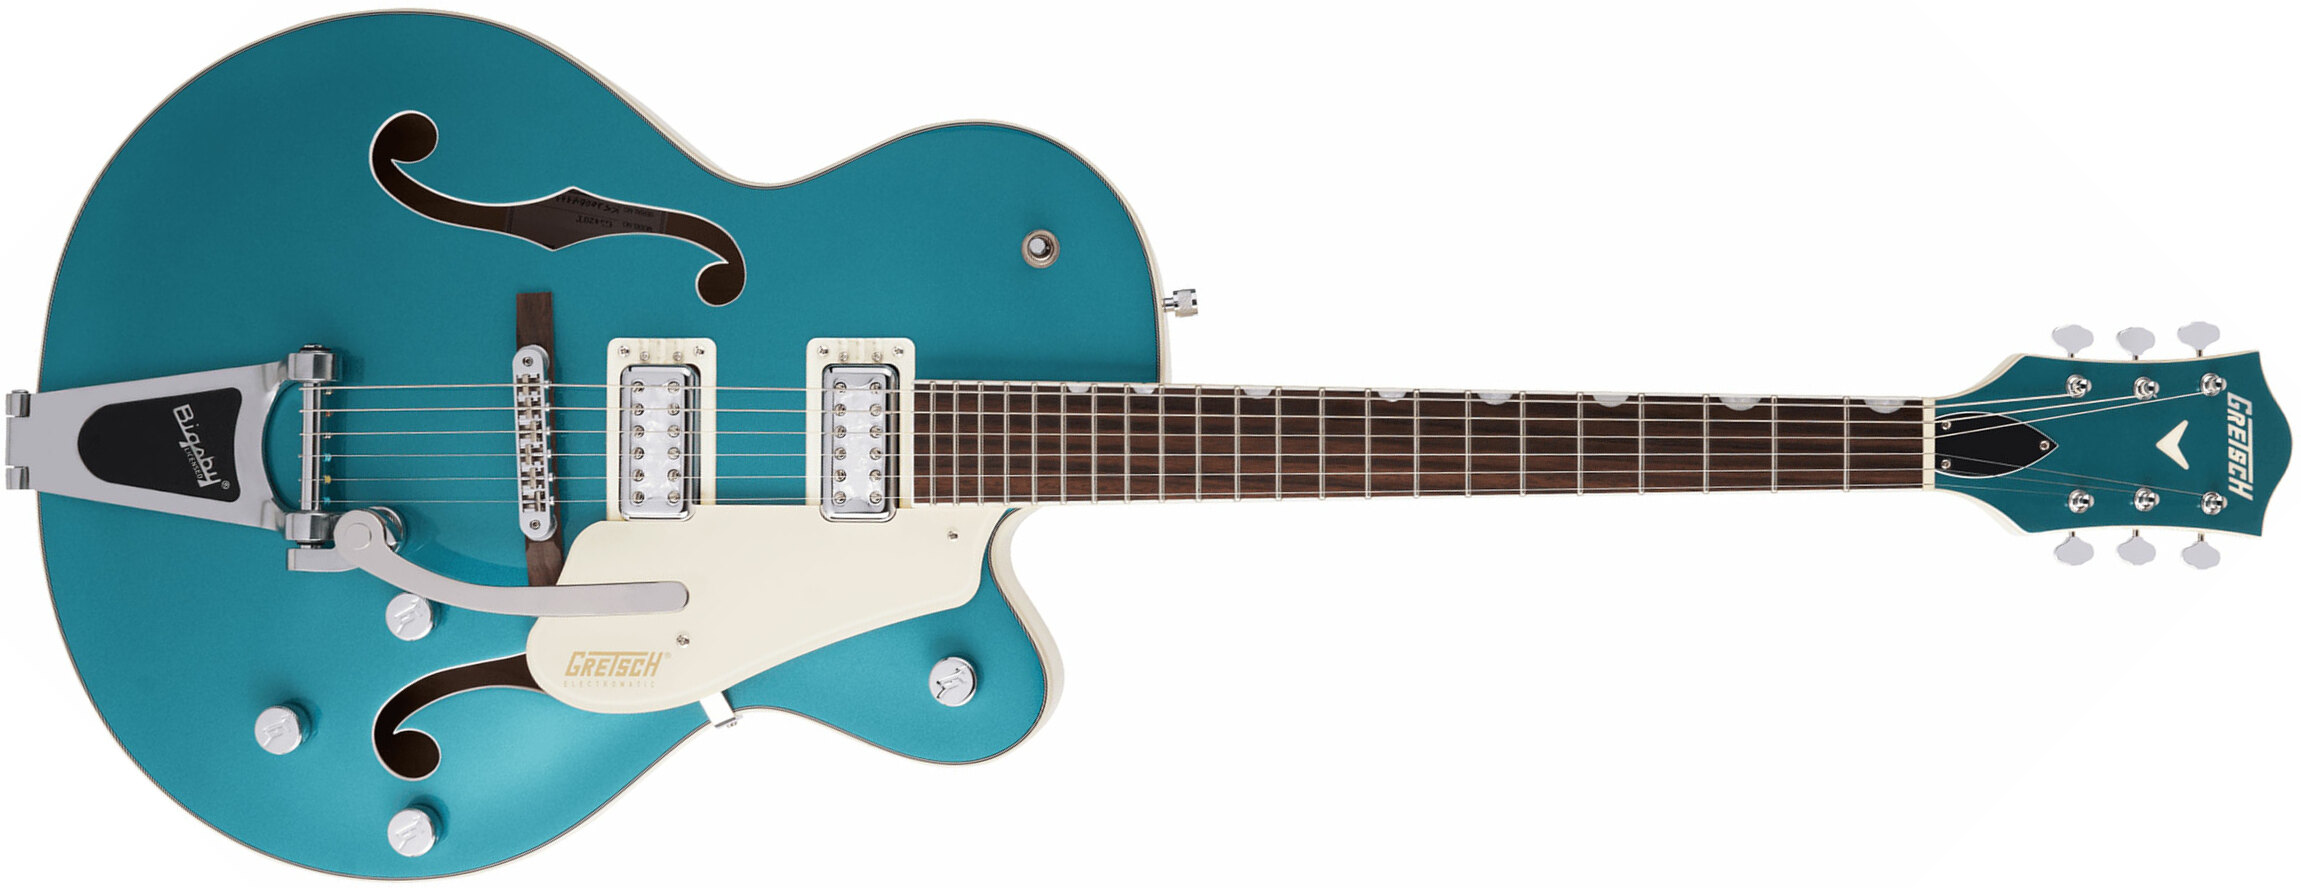 Gretsch G5410t Tri-five Electromatic Hollow Hh Bigsby Rw - Two-tone Ocean Turquoise/vintage White - Semi hollow elektriche gitaar - Main picture